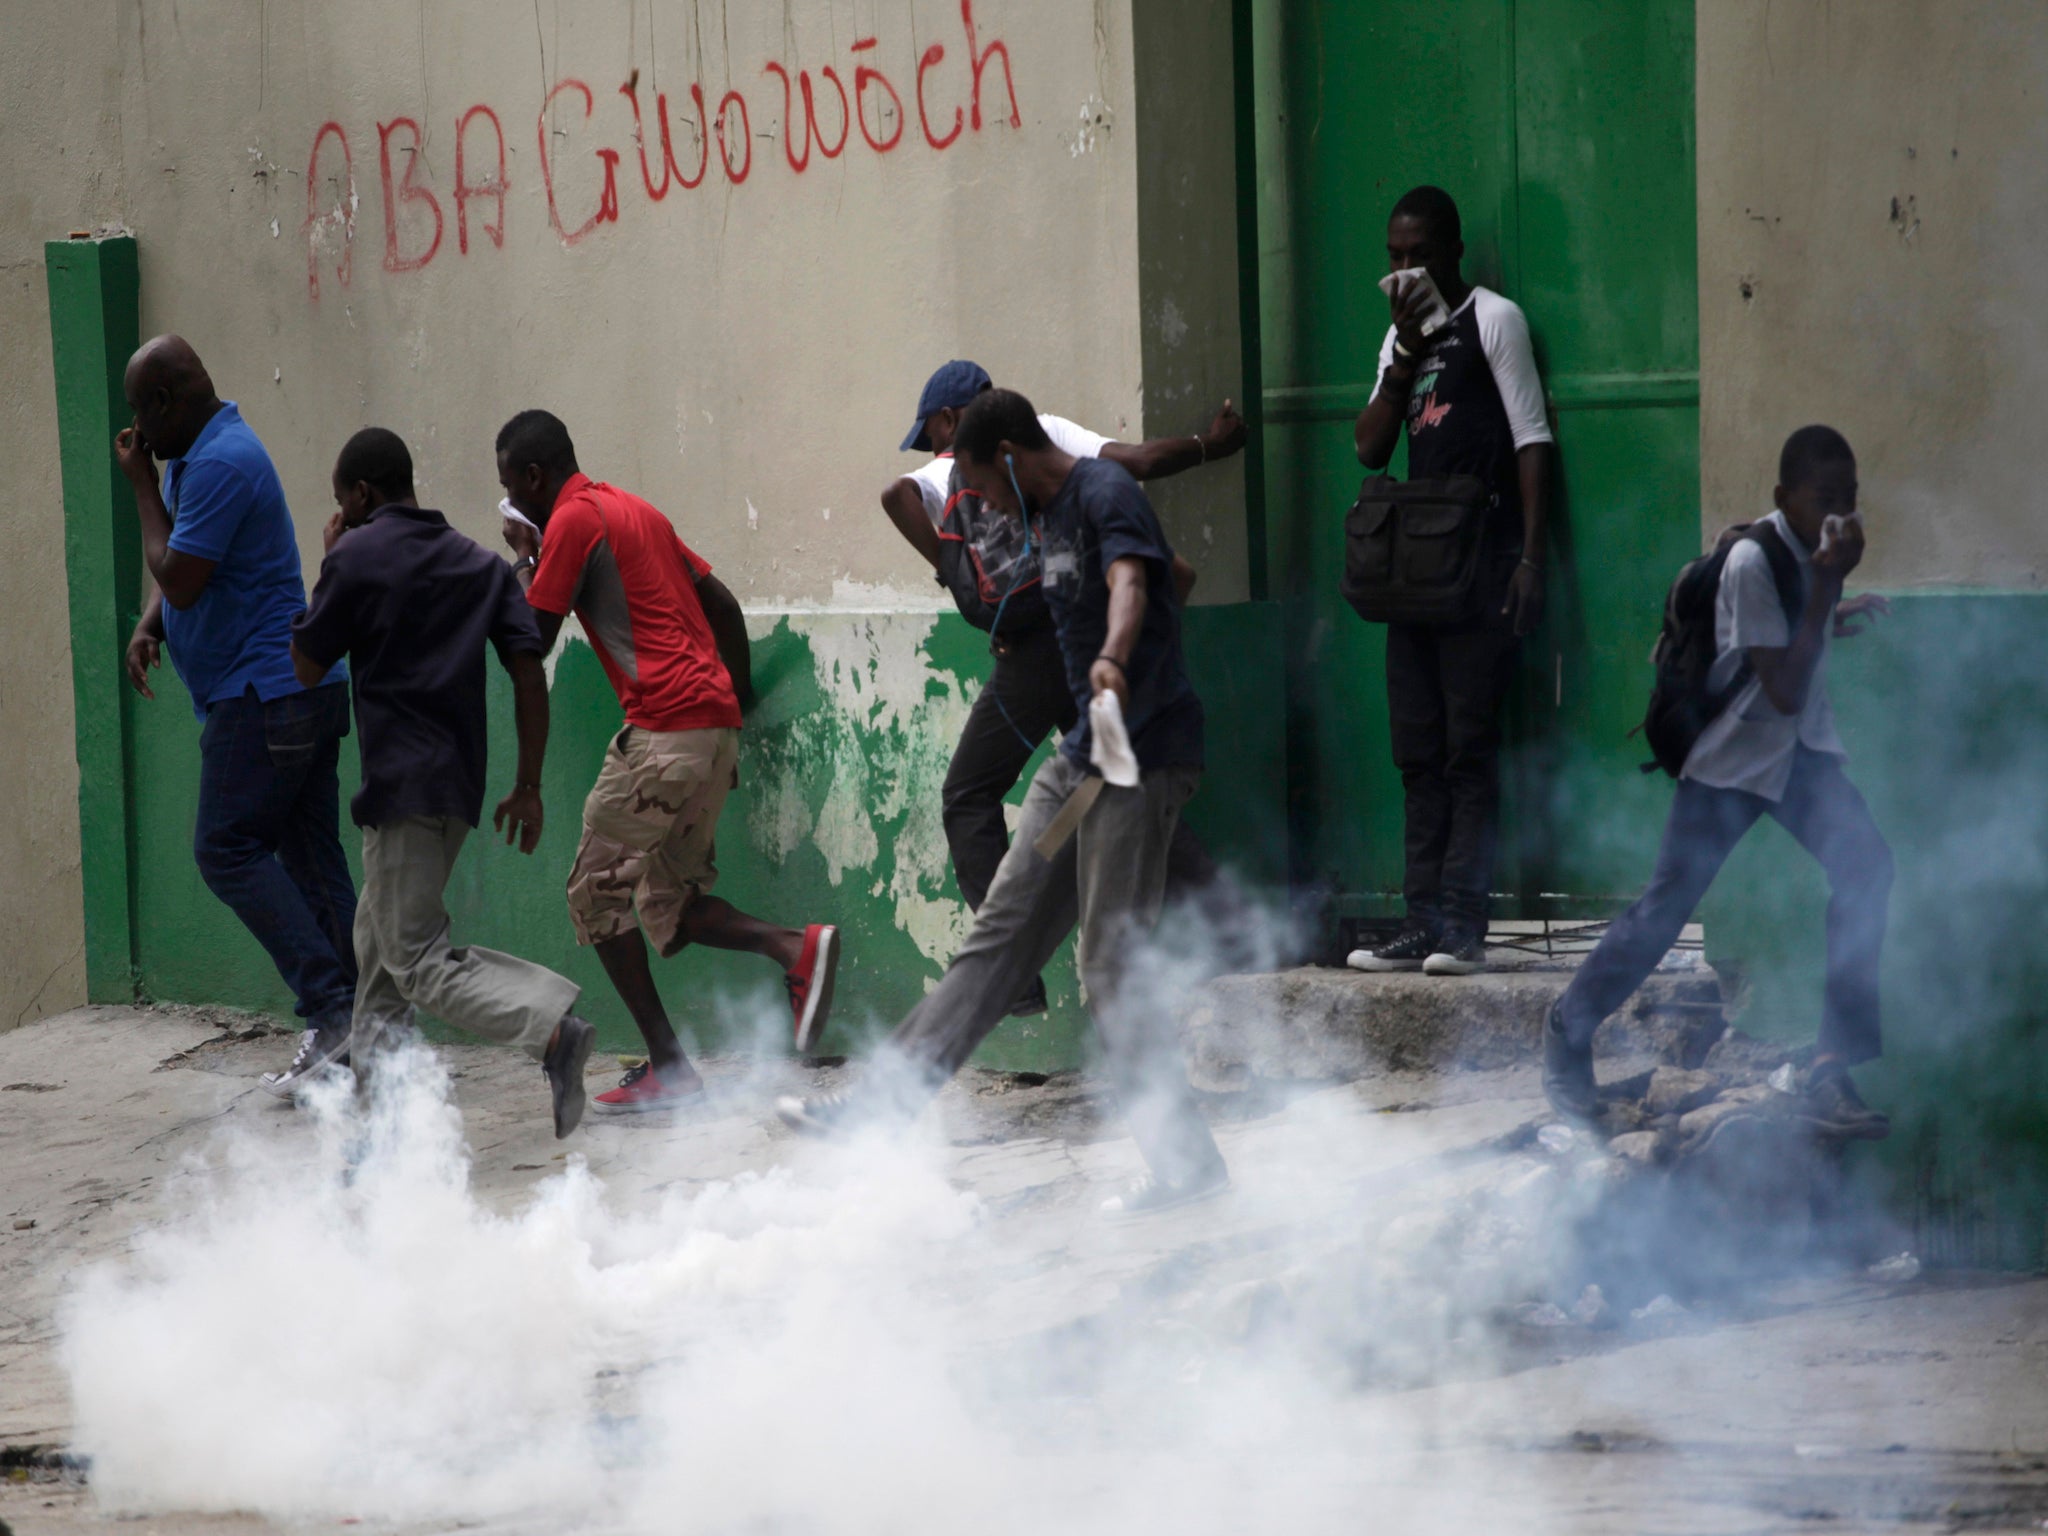 At the weekend police in Haiti fired tear gas at anti-government protesters